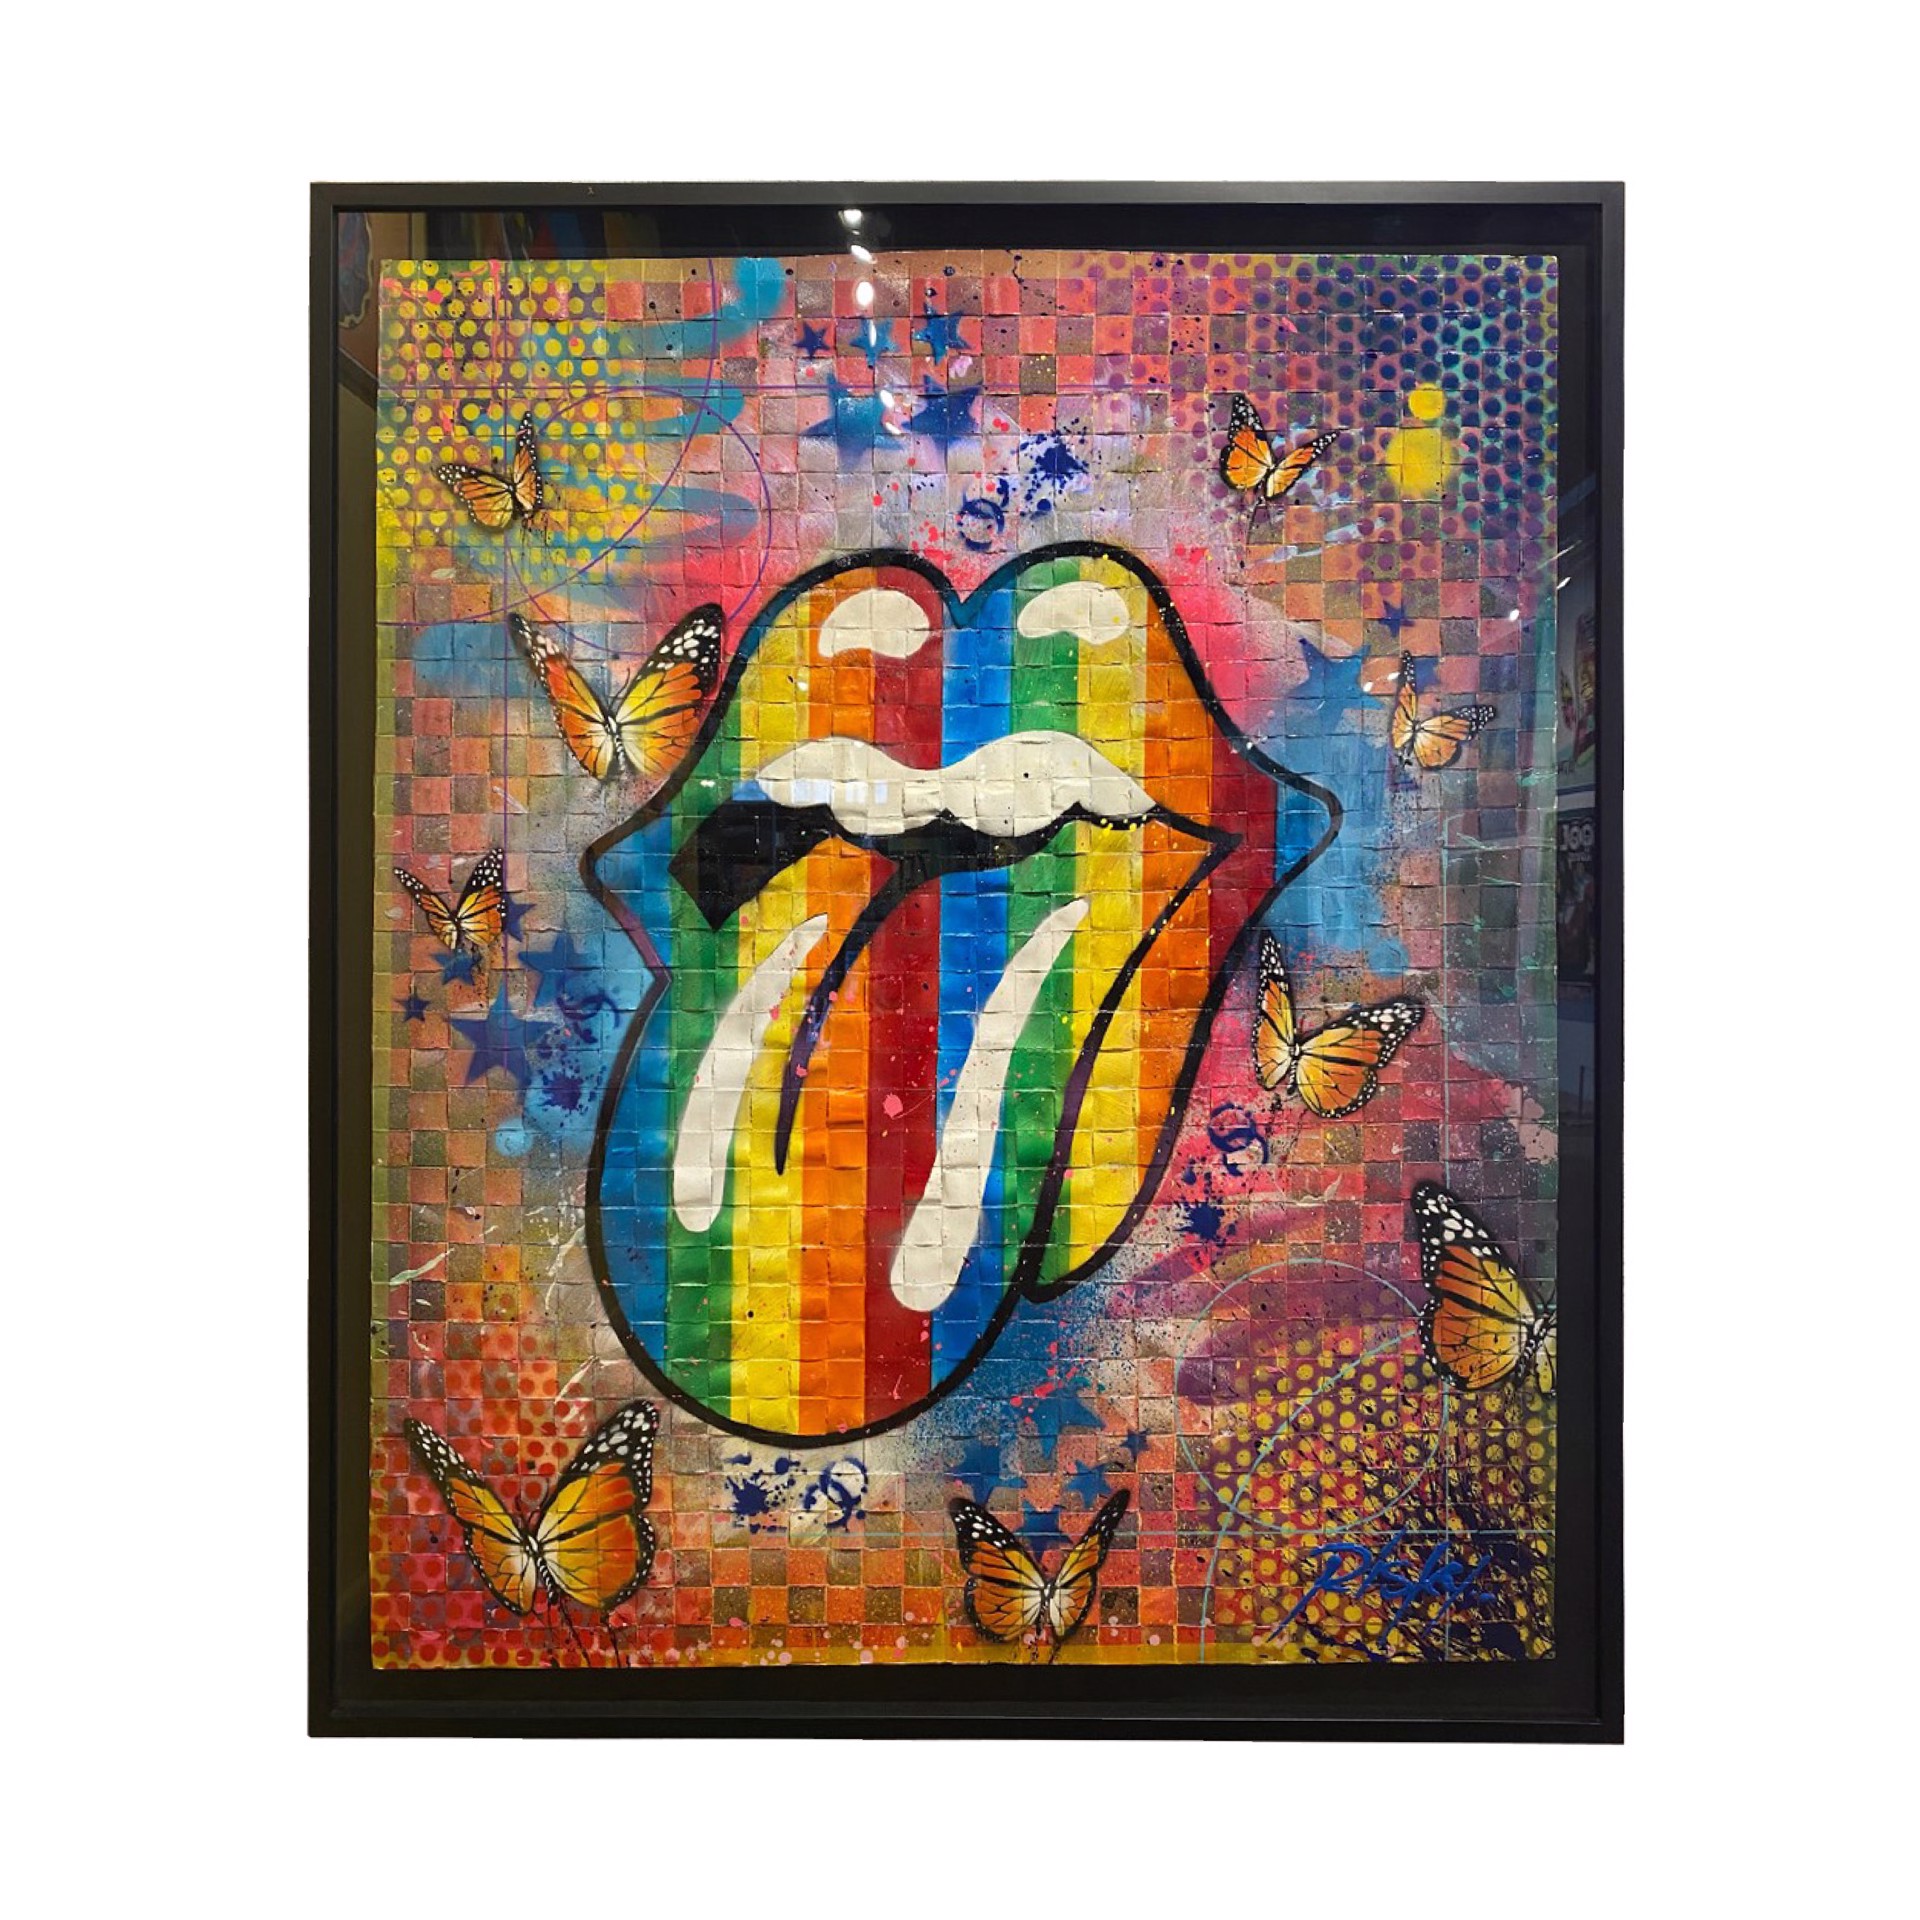 Rolling Stones by Risk